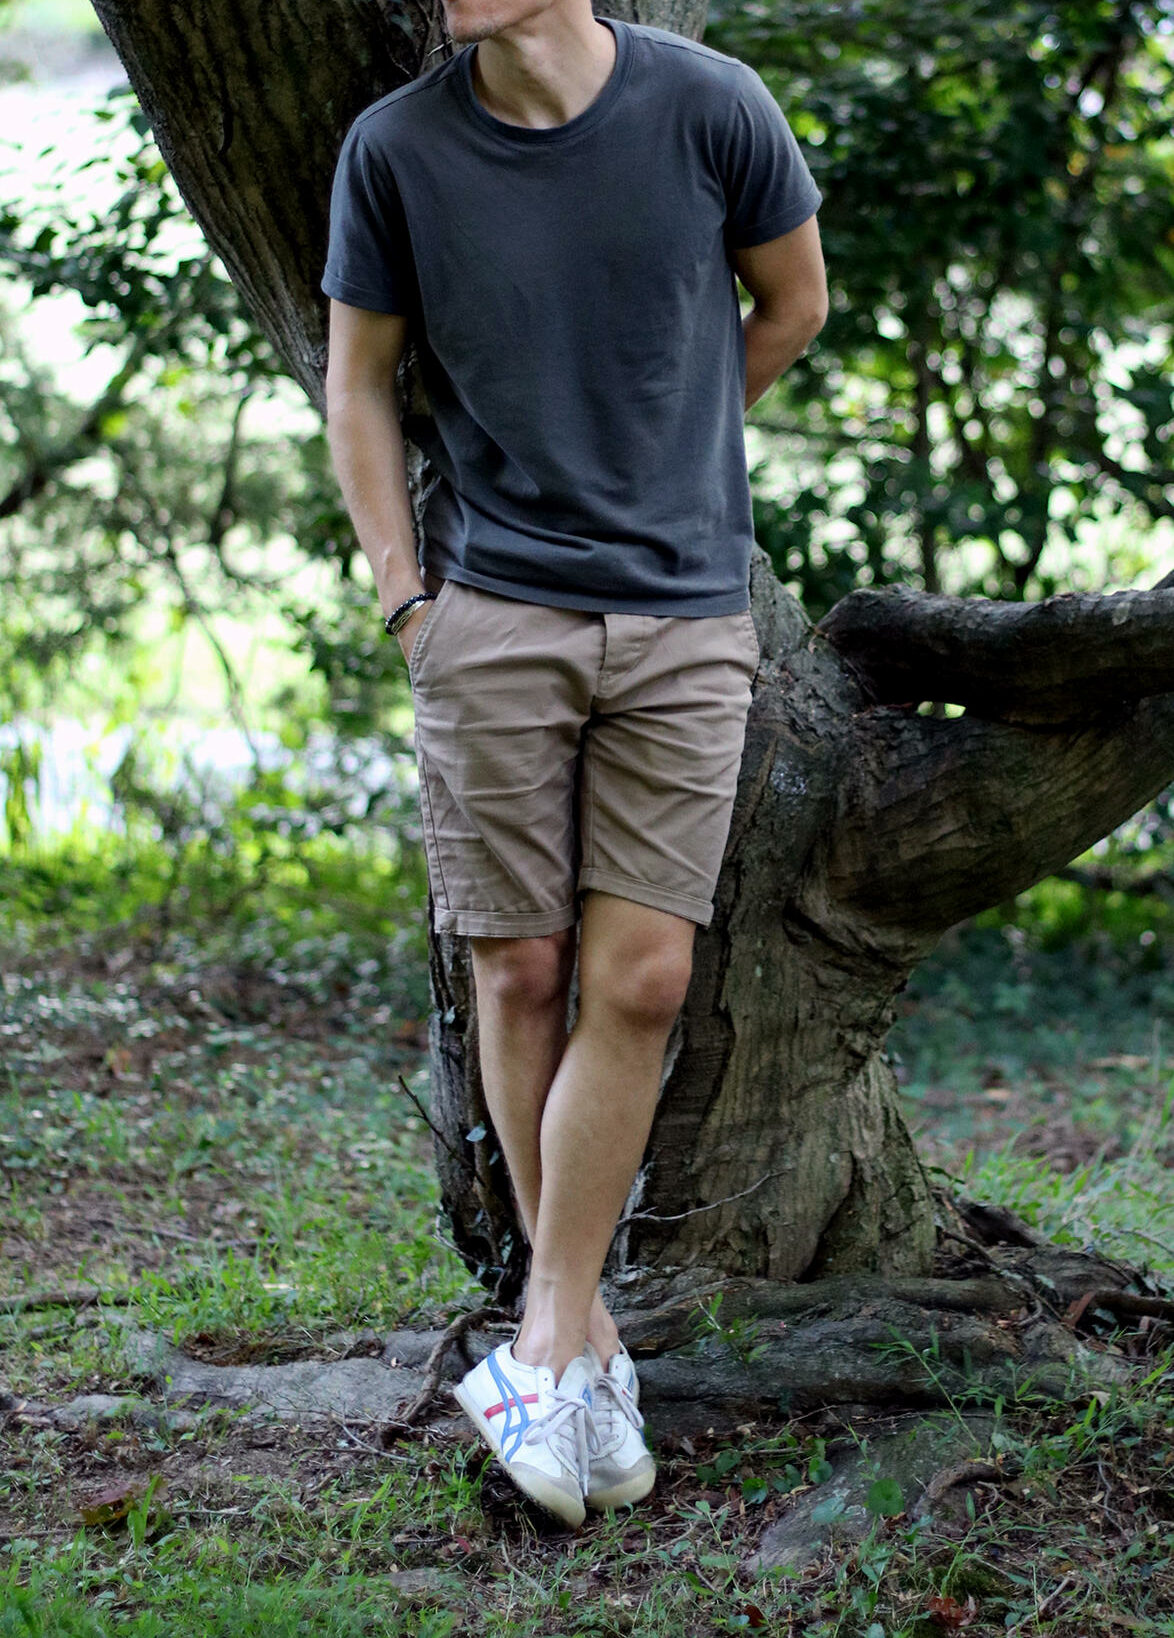 How to Wear Mens Denim Shorts in 2023  Our Top Picks  Dapper Confidential